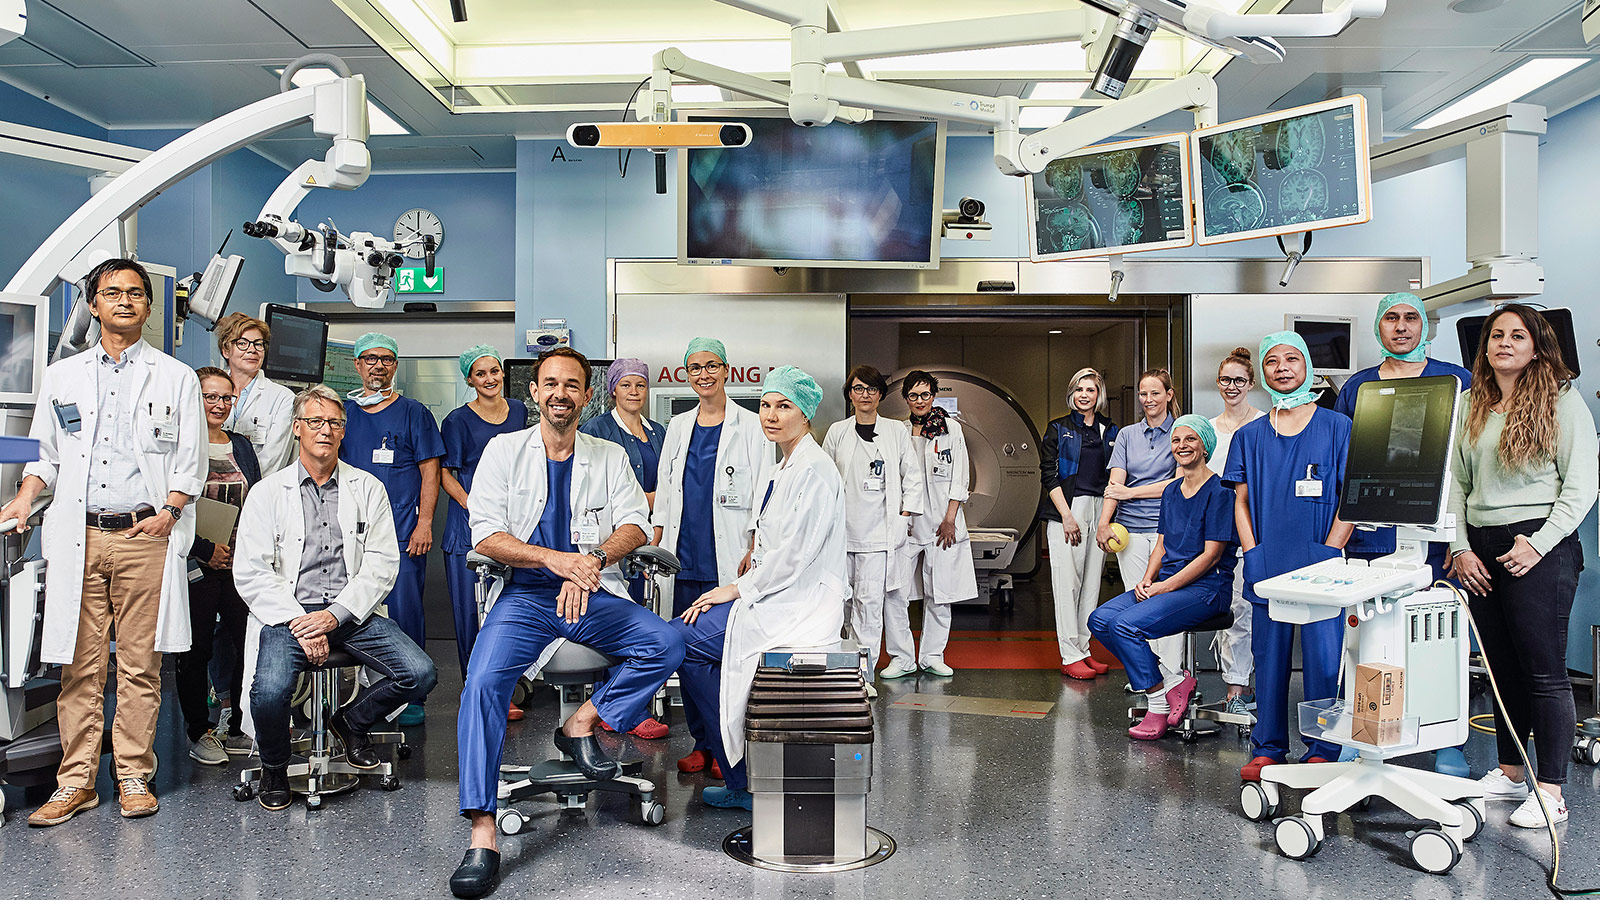 Group photo of the neuro-oncology staff in the operating room